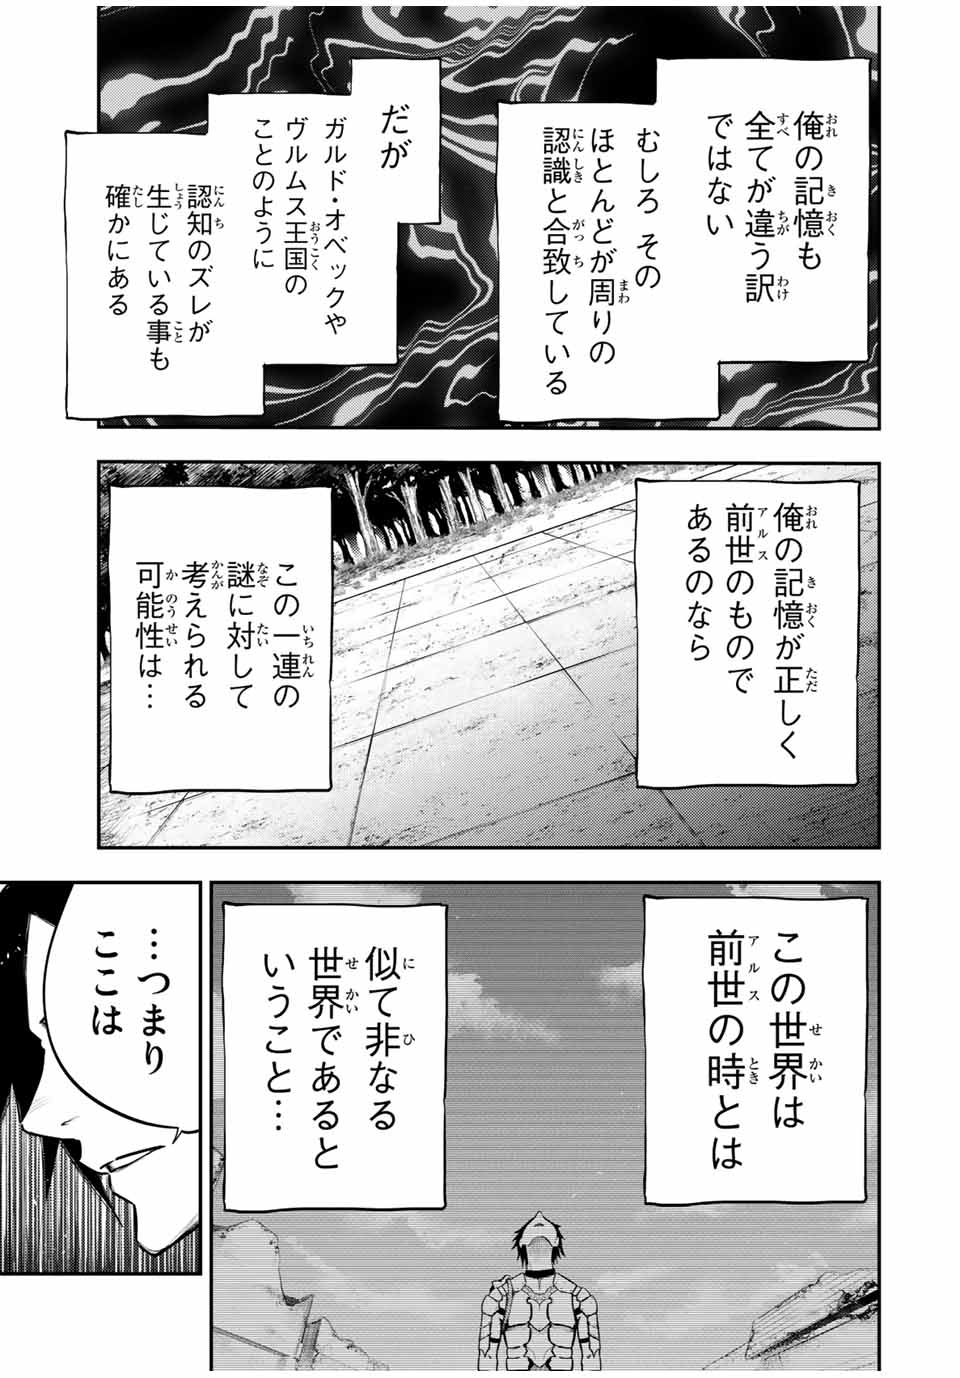 the strongest former prince-; 奴隷転生 ～その奴隷、最強の元王子につき～ 第50話 - Page 3